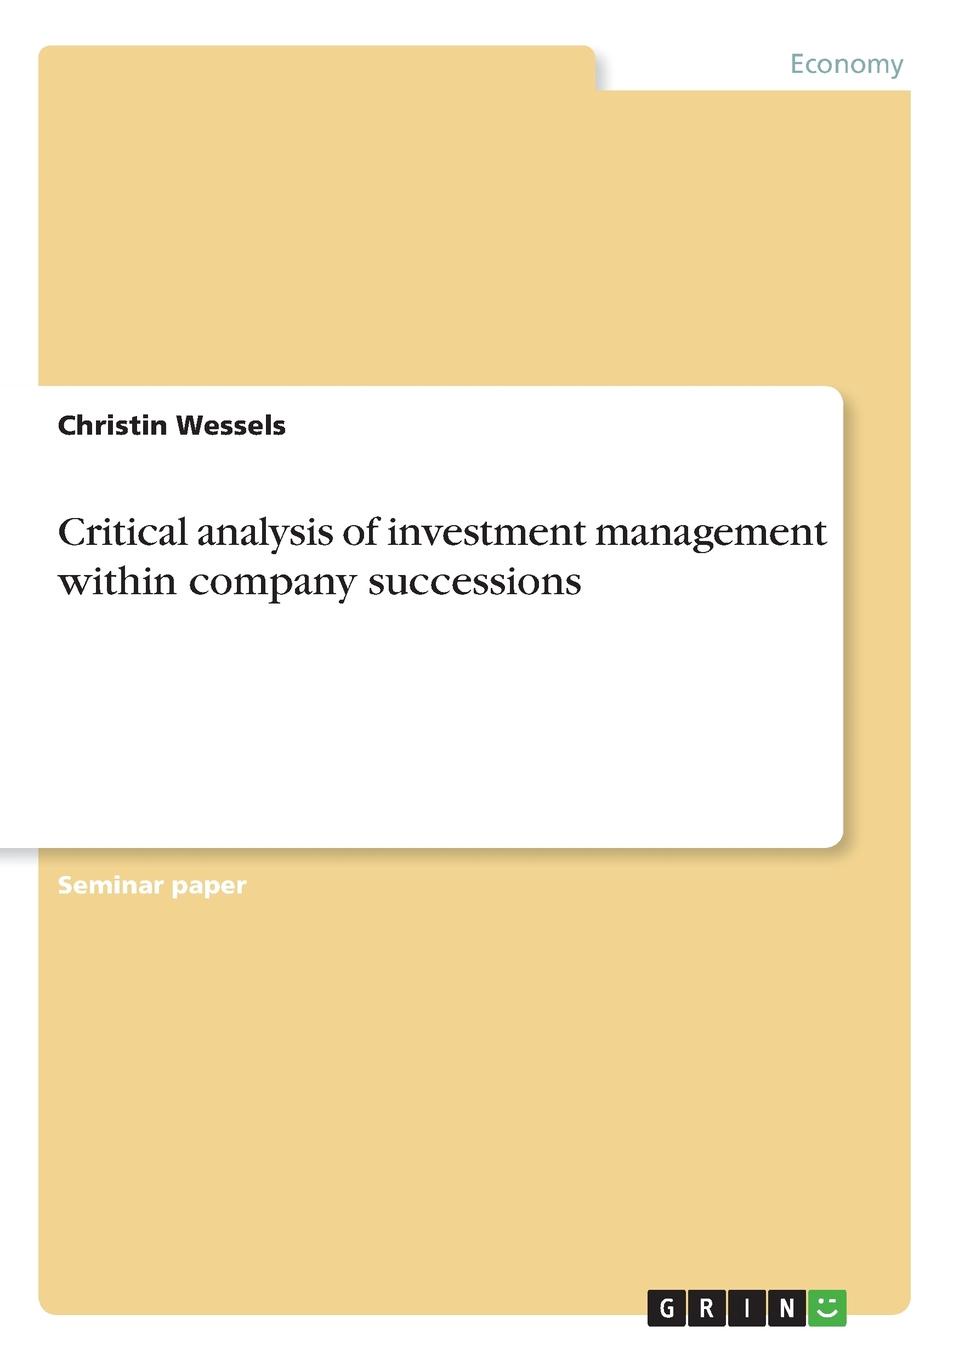 Critical analysis of investment management within company successions